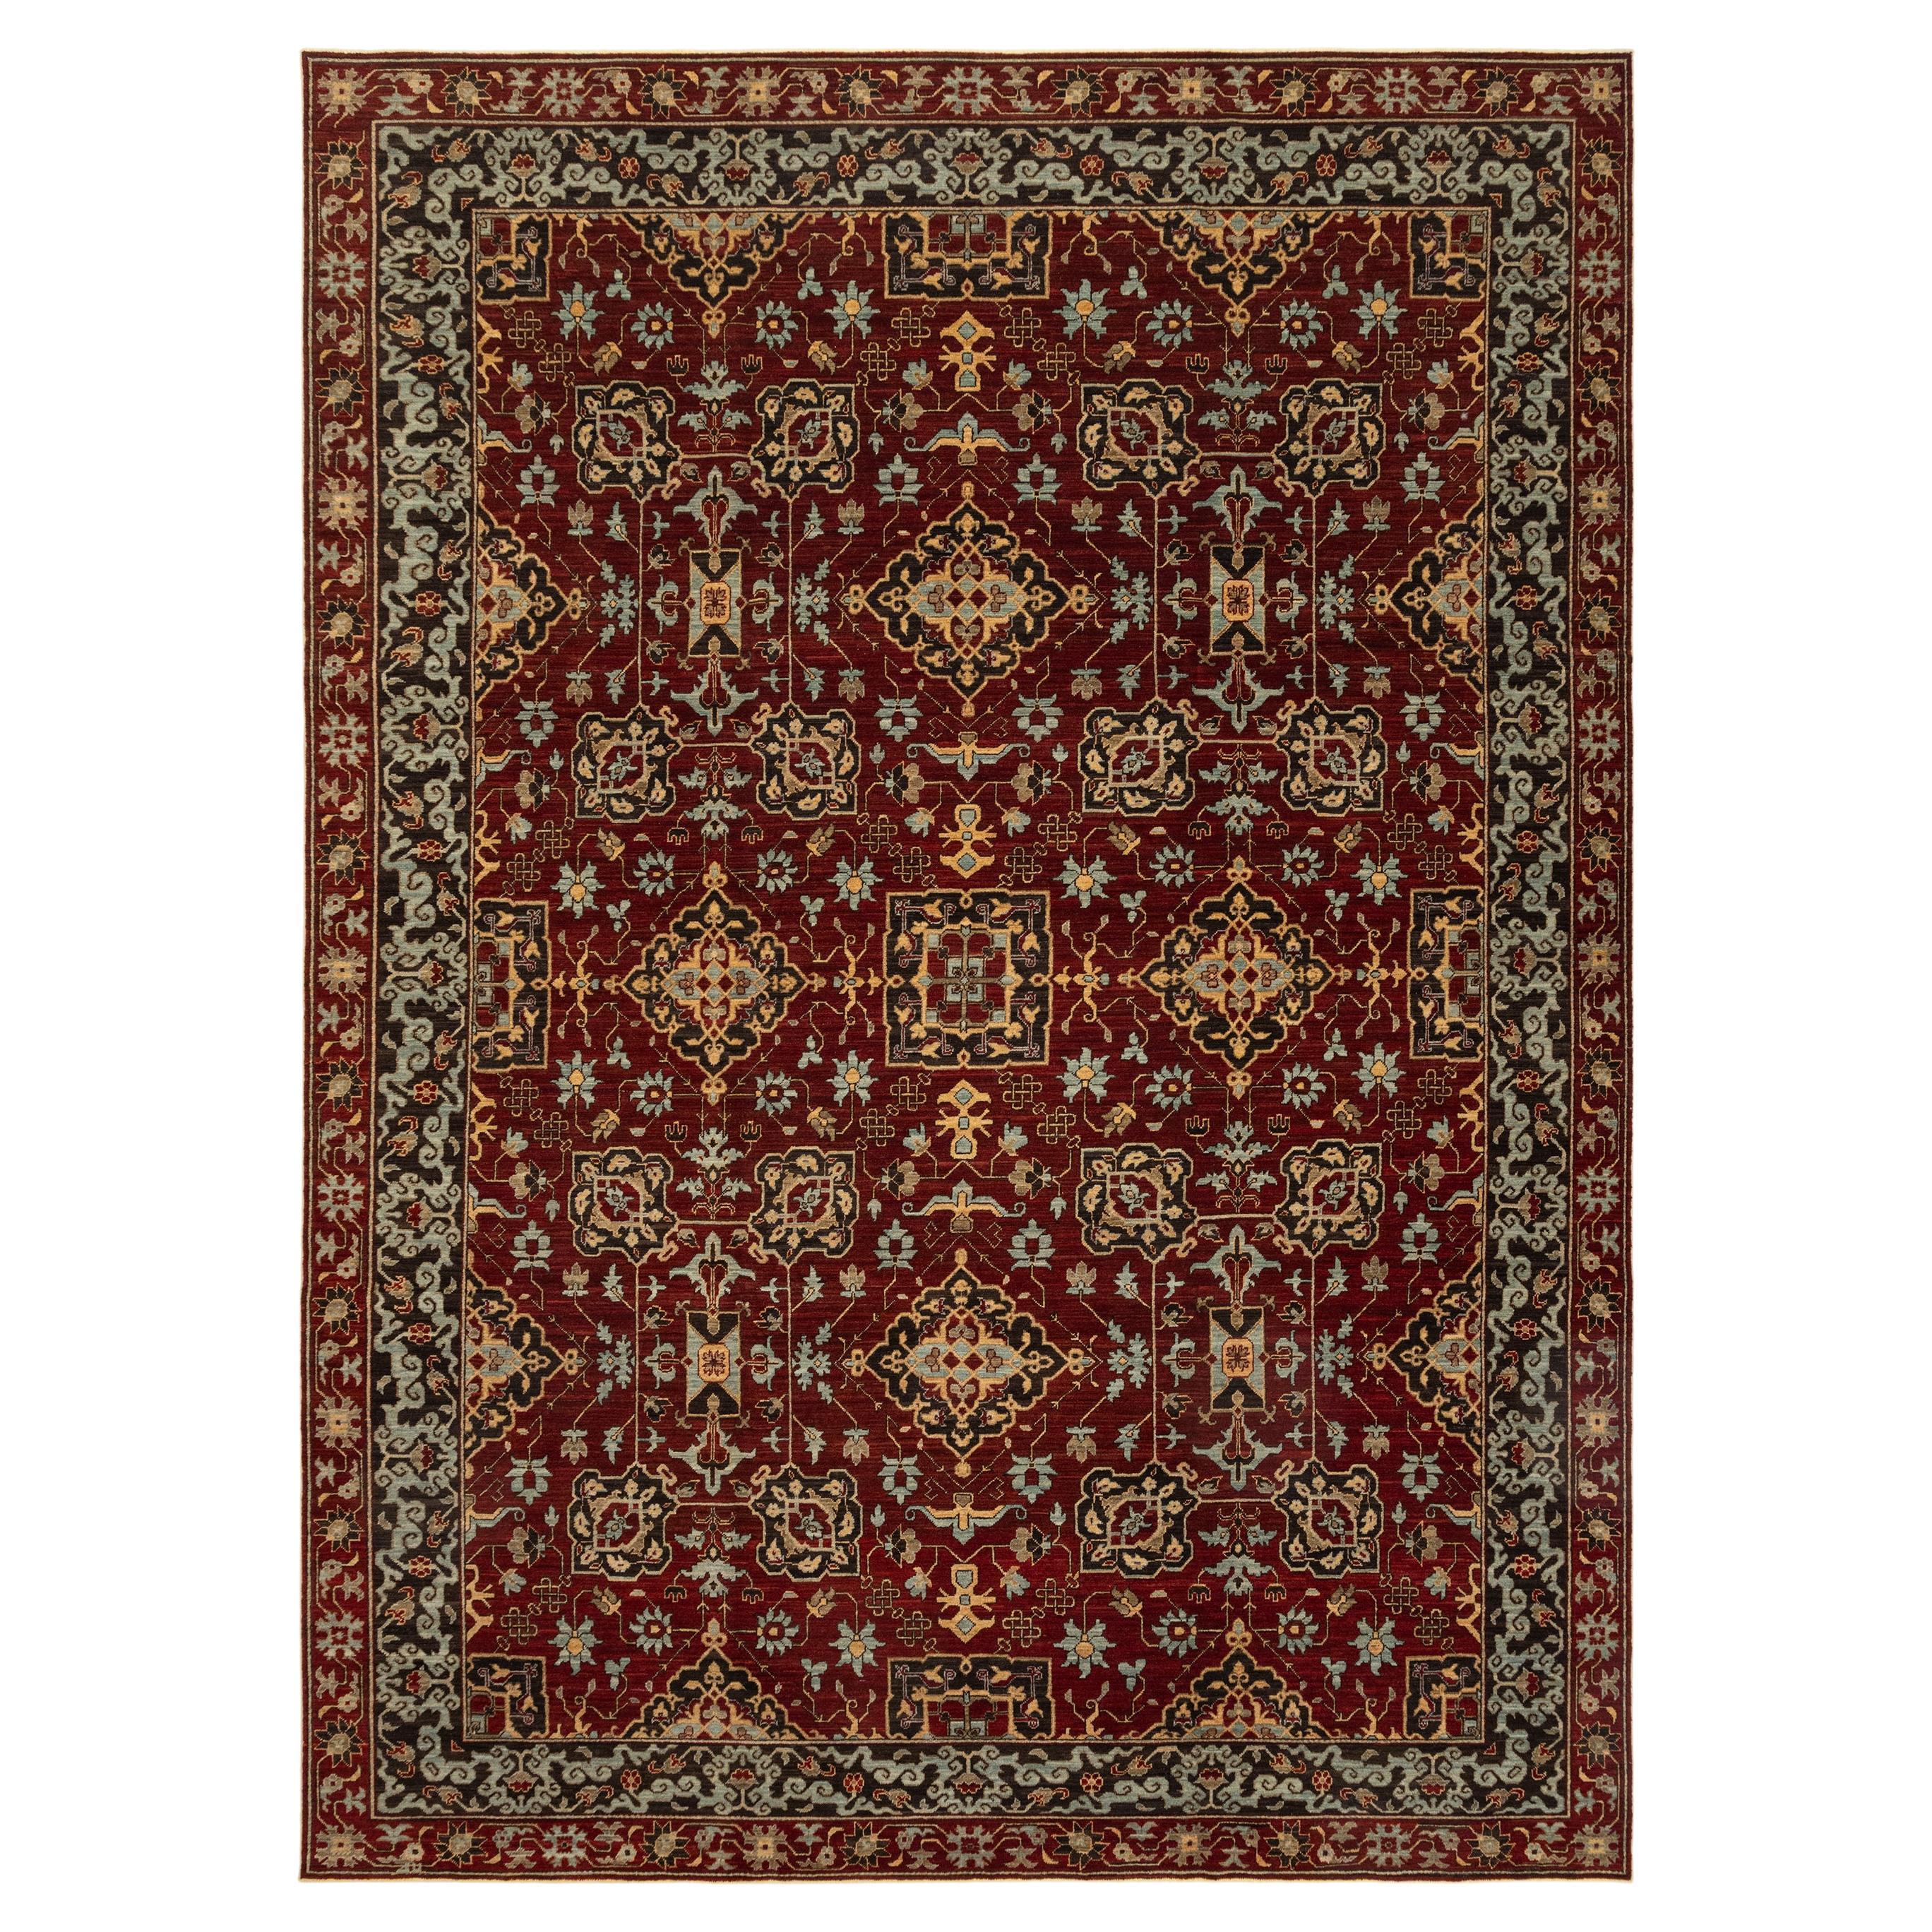 Tapis traditionnel afghan rouge